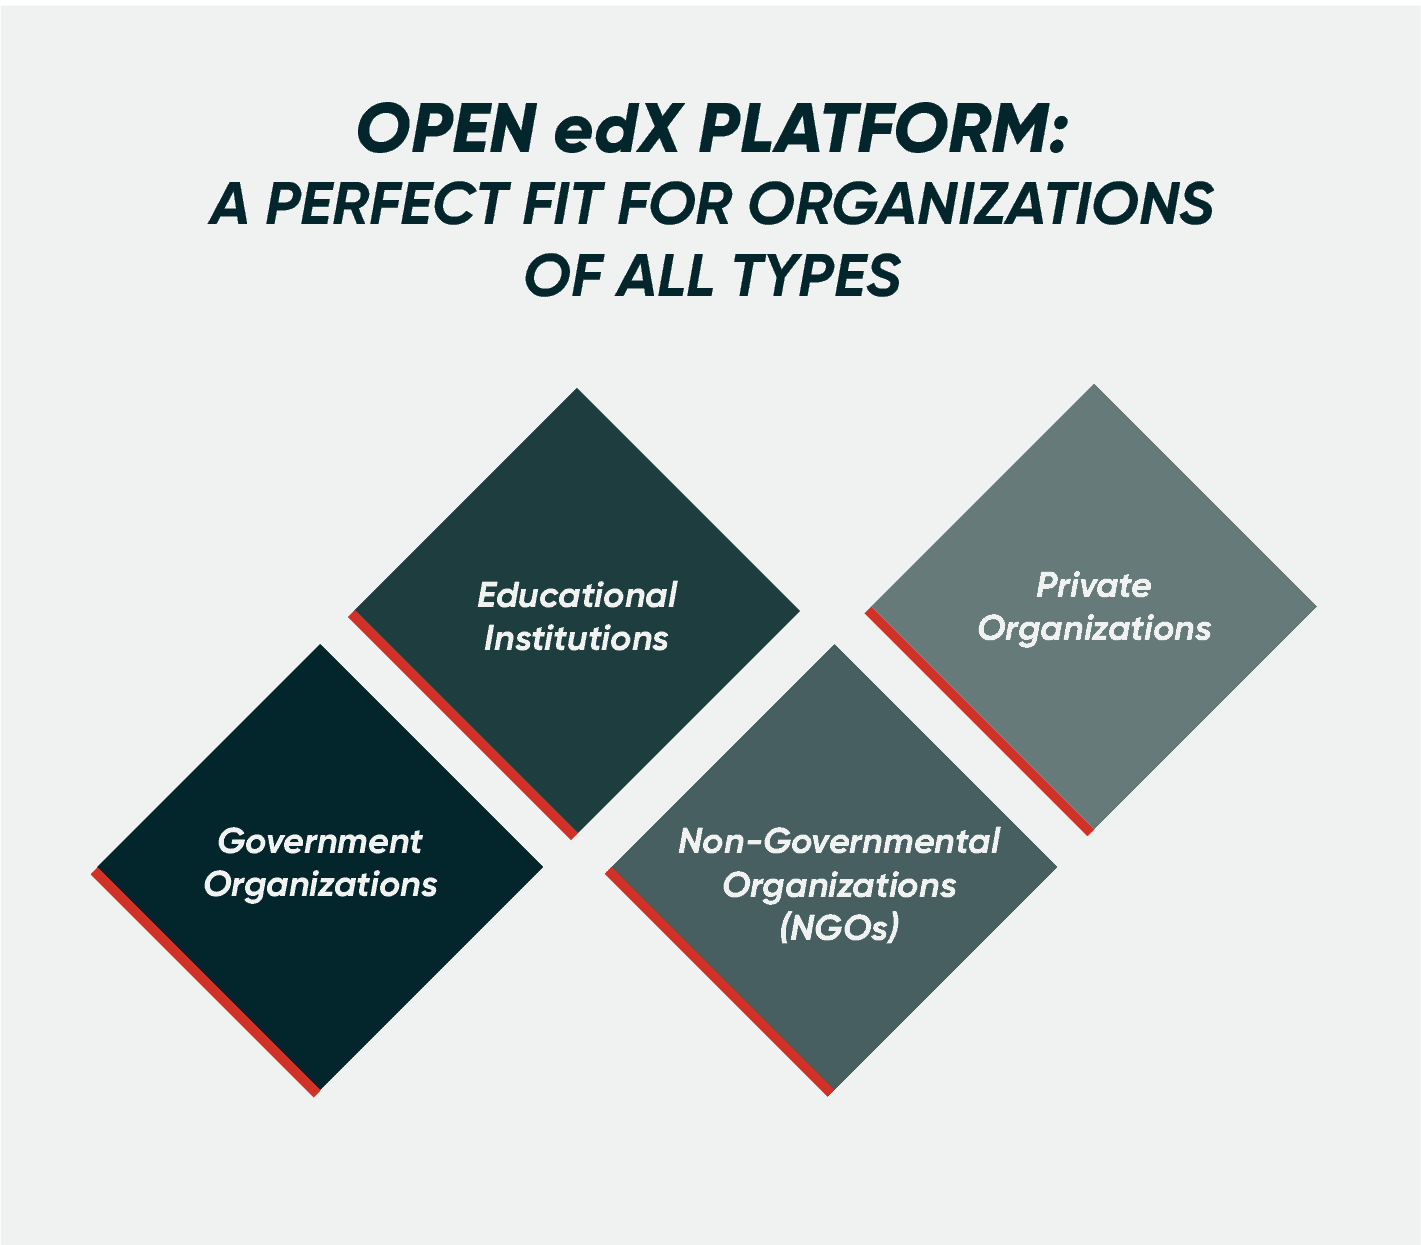 Open edx is suitable for which organizations